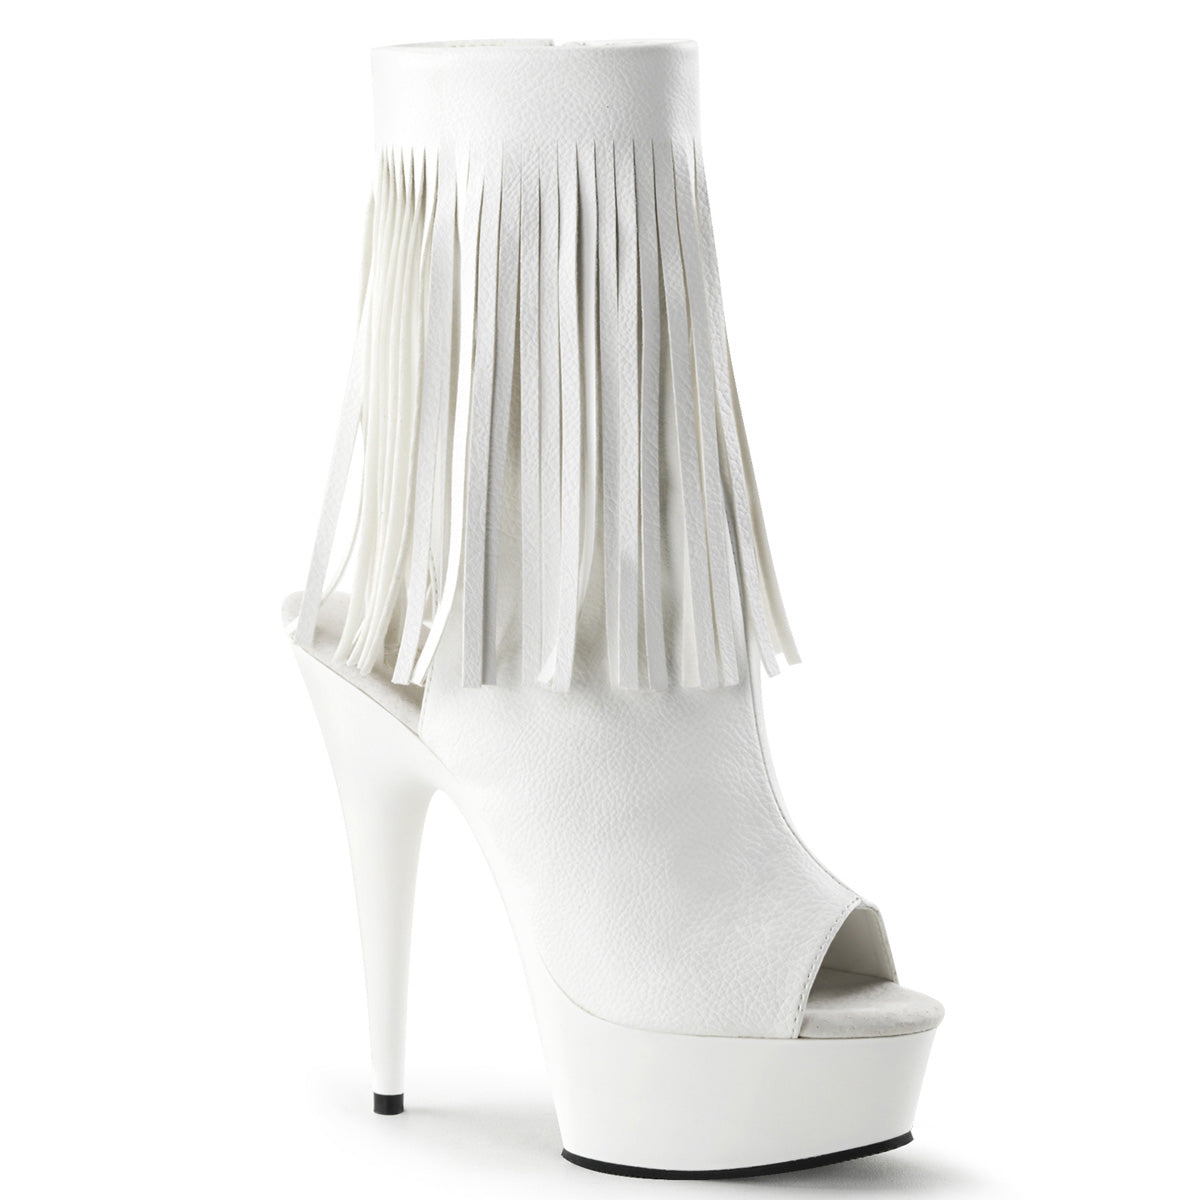 DELIGHT-1019 White Faux Leather Boots